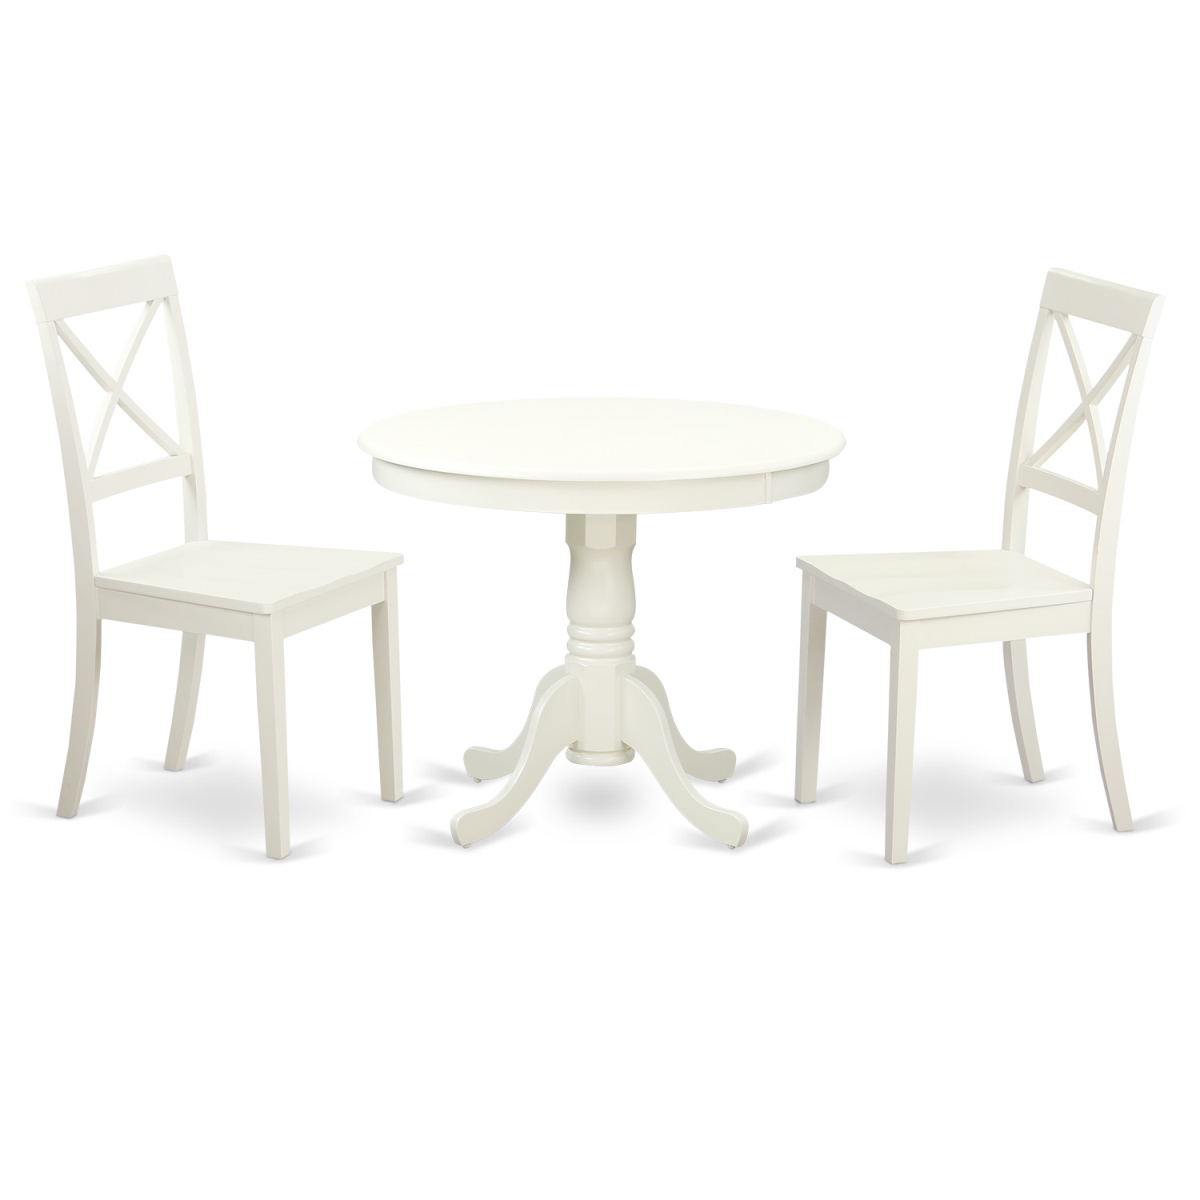 Picture of East West Furniture ANBO3-LWH-W Dining Set - One Round Table & Two Solid Wood Chairs, Linen White - 3 Piece